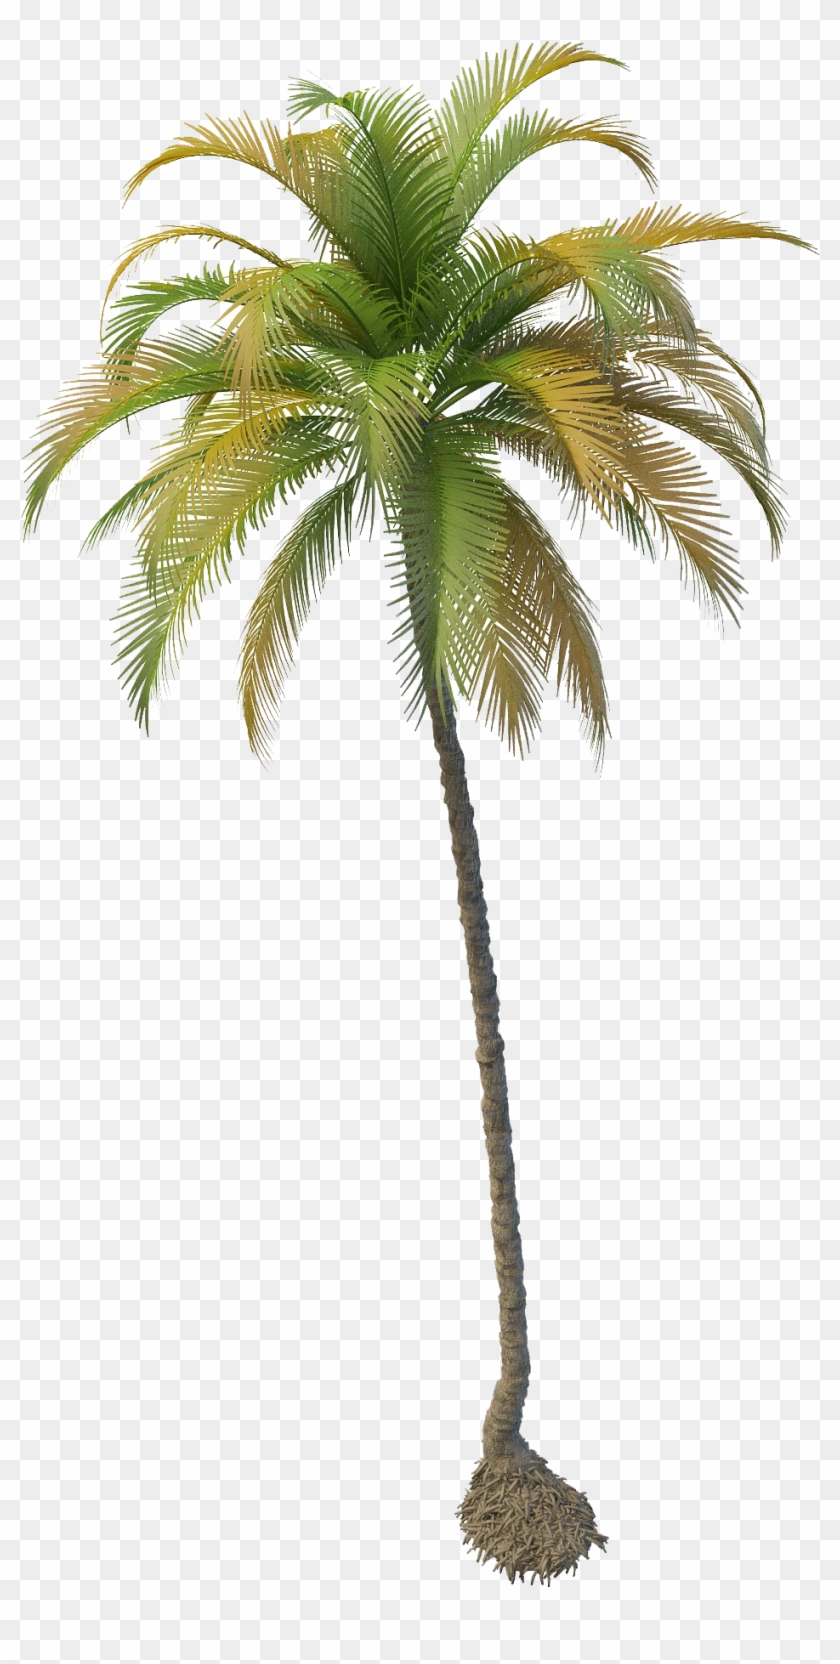 Coconut Clipart House - Coconut Tree Png File #384406